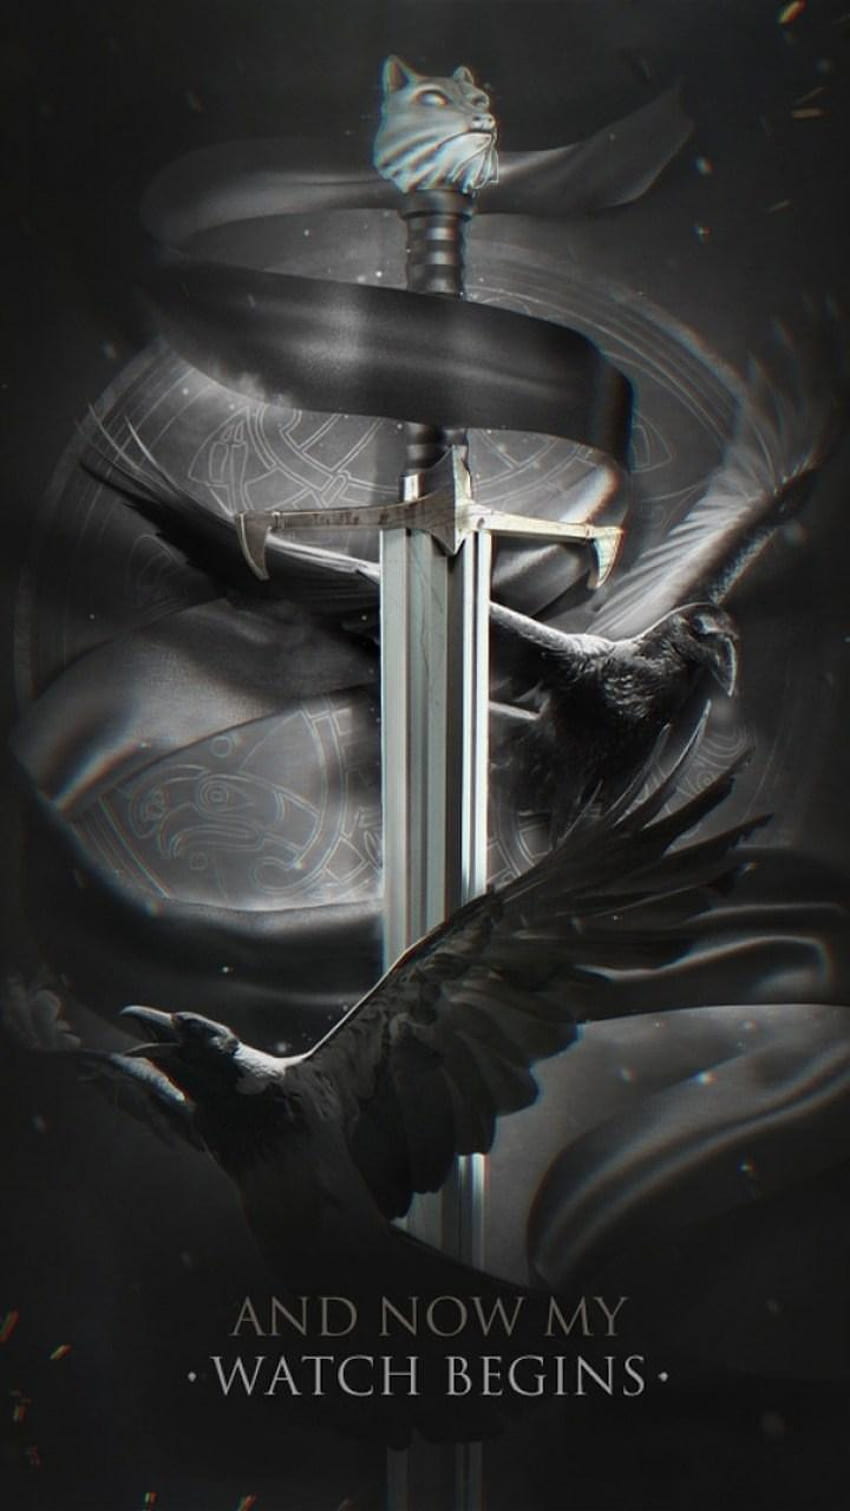 Game of Thrones : Get It Today For Your Mobile, game of thrones phone HD phone wallpaper